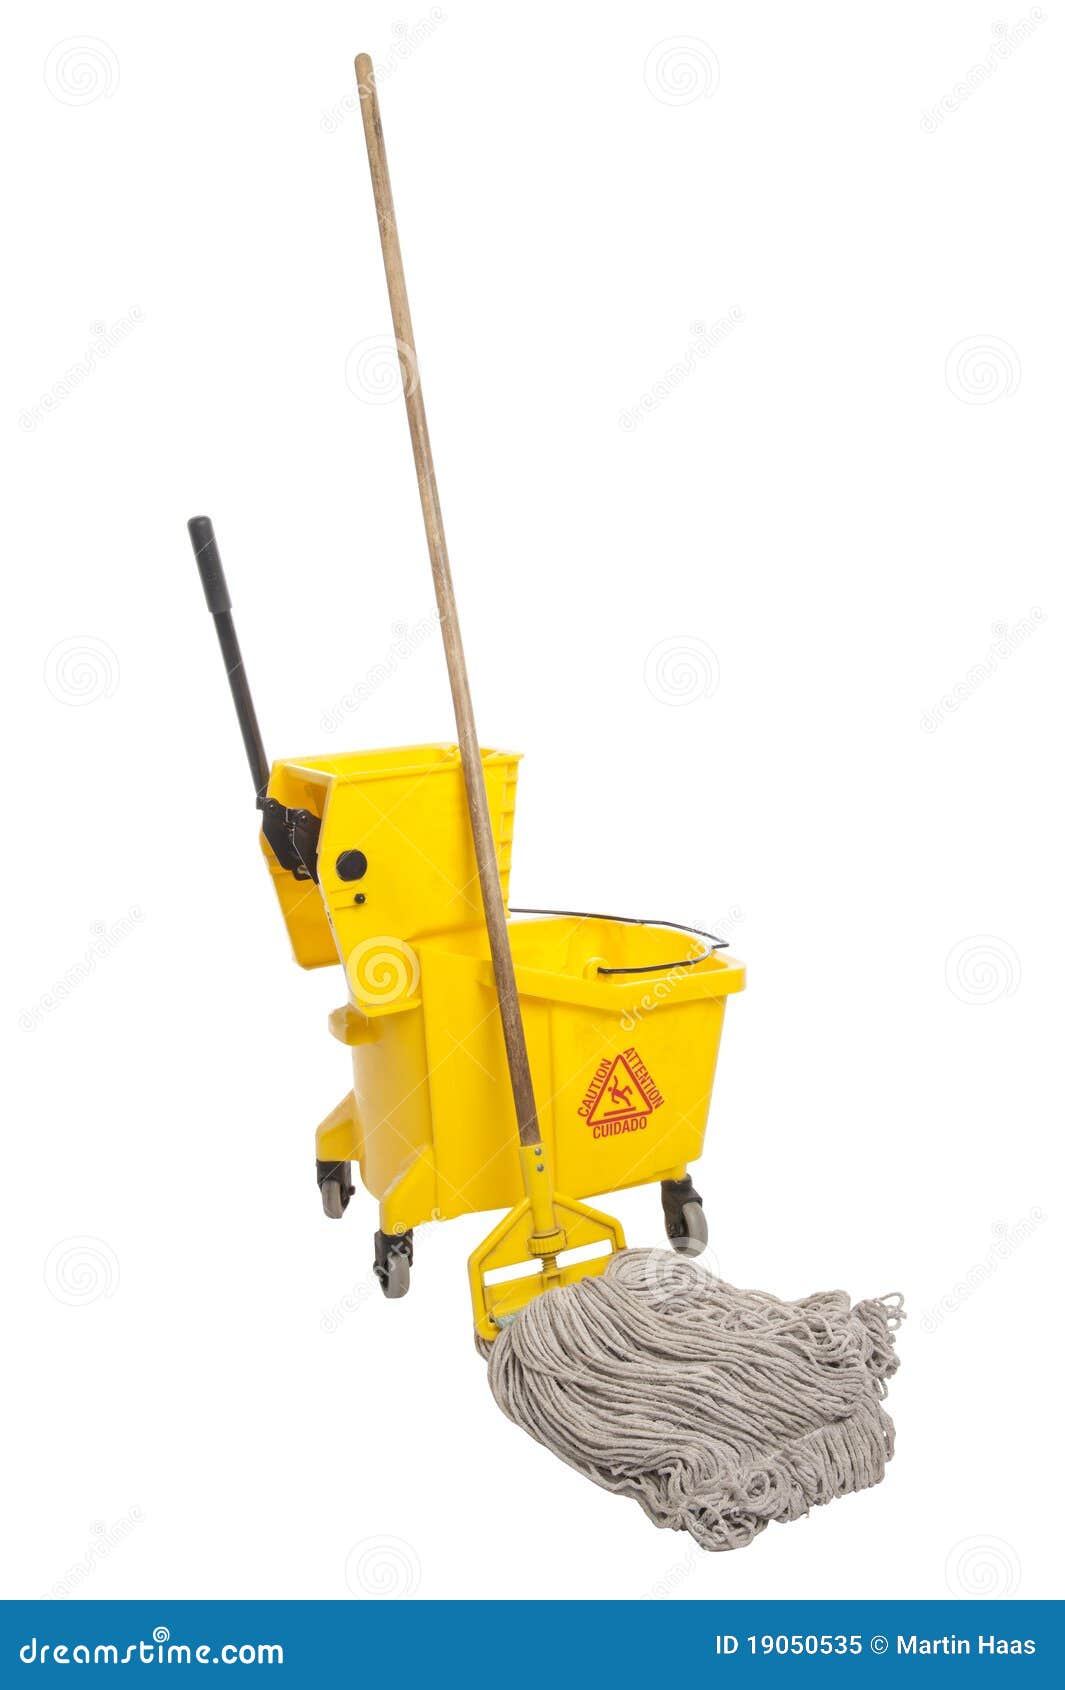 Industrial Mop And Bucket Royalty Free Stock Photo  Image: 19050535